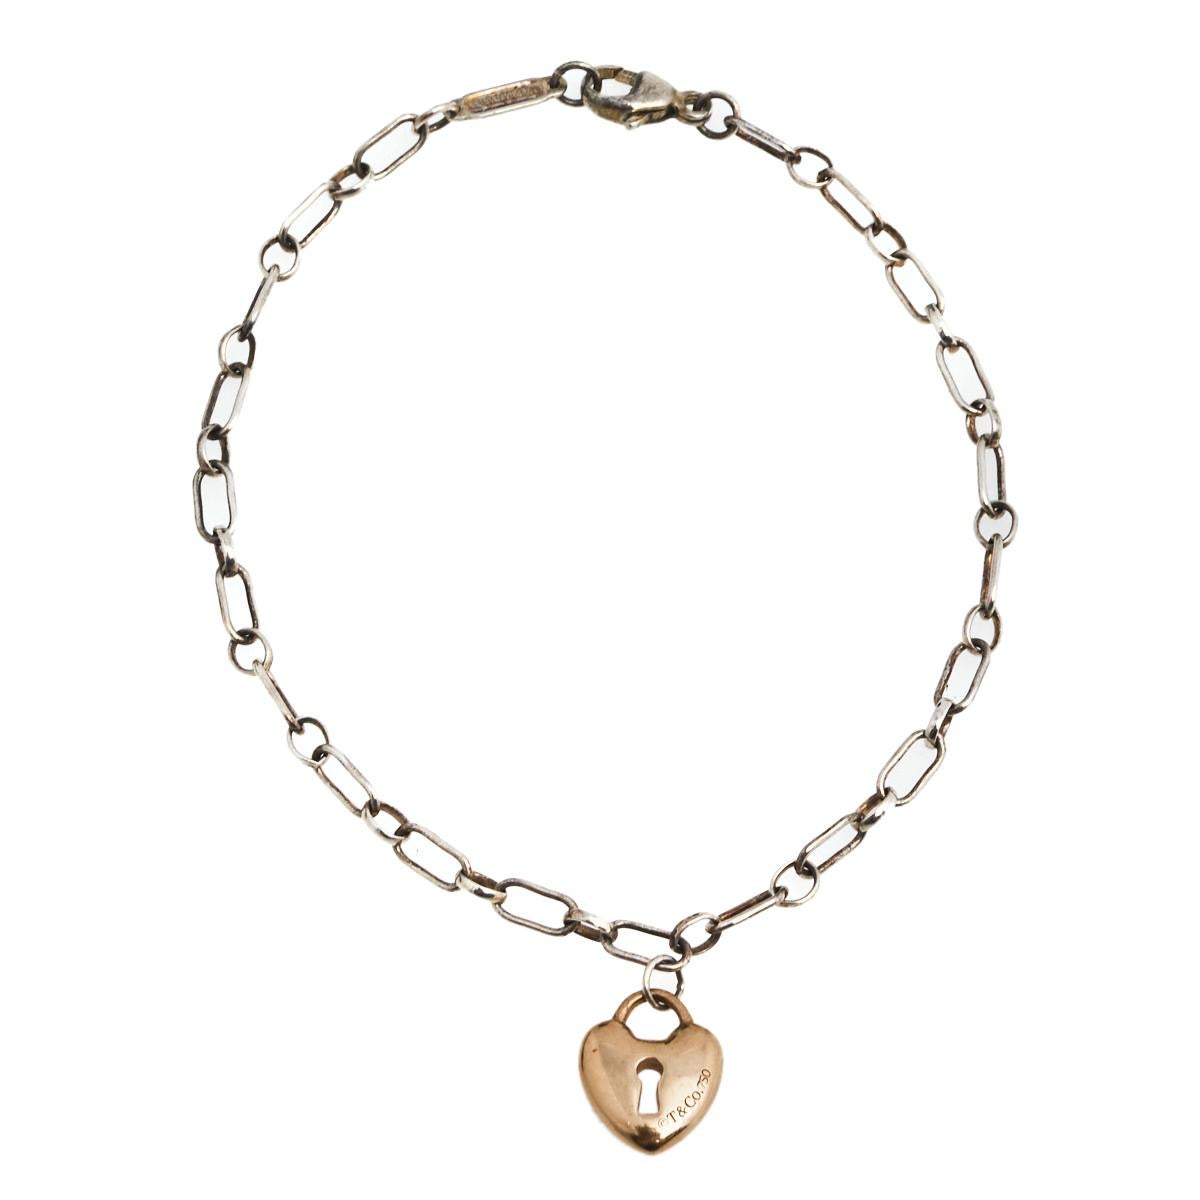 Let Tiffany's famous motif of a heart lock be yours through this bracelet. Crafted in silver, the bracelet has a chain-link holding an iconic Heart Lock charm, rendered in 18k rose gold, dangling beautifully. Unlock love today and every day when you